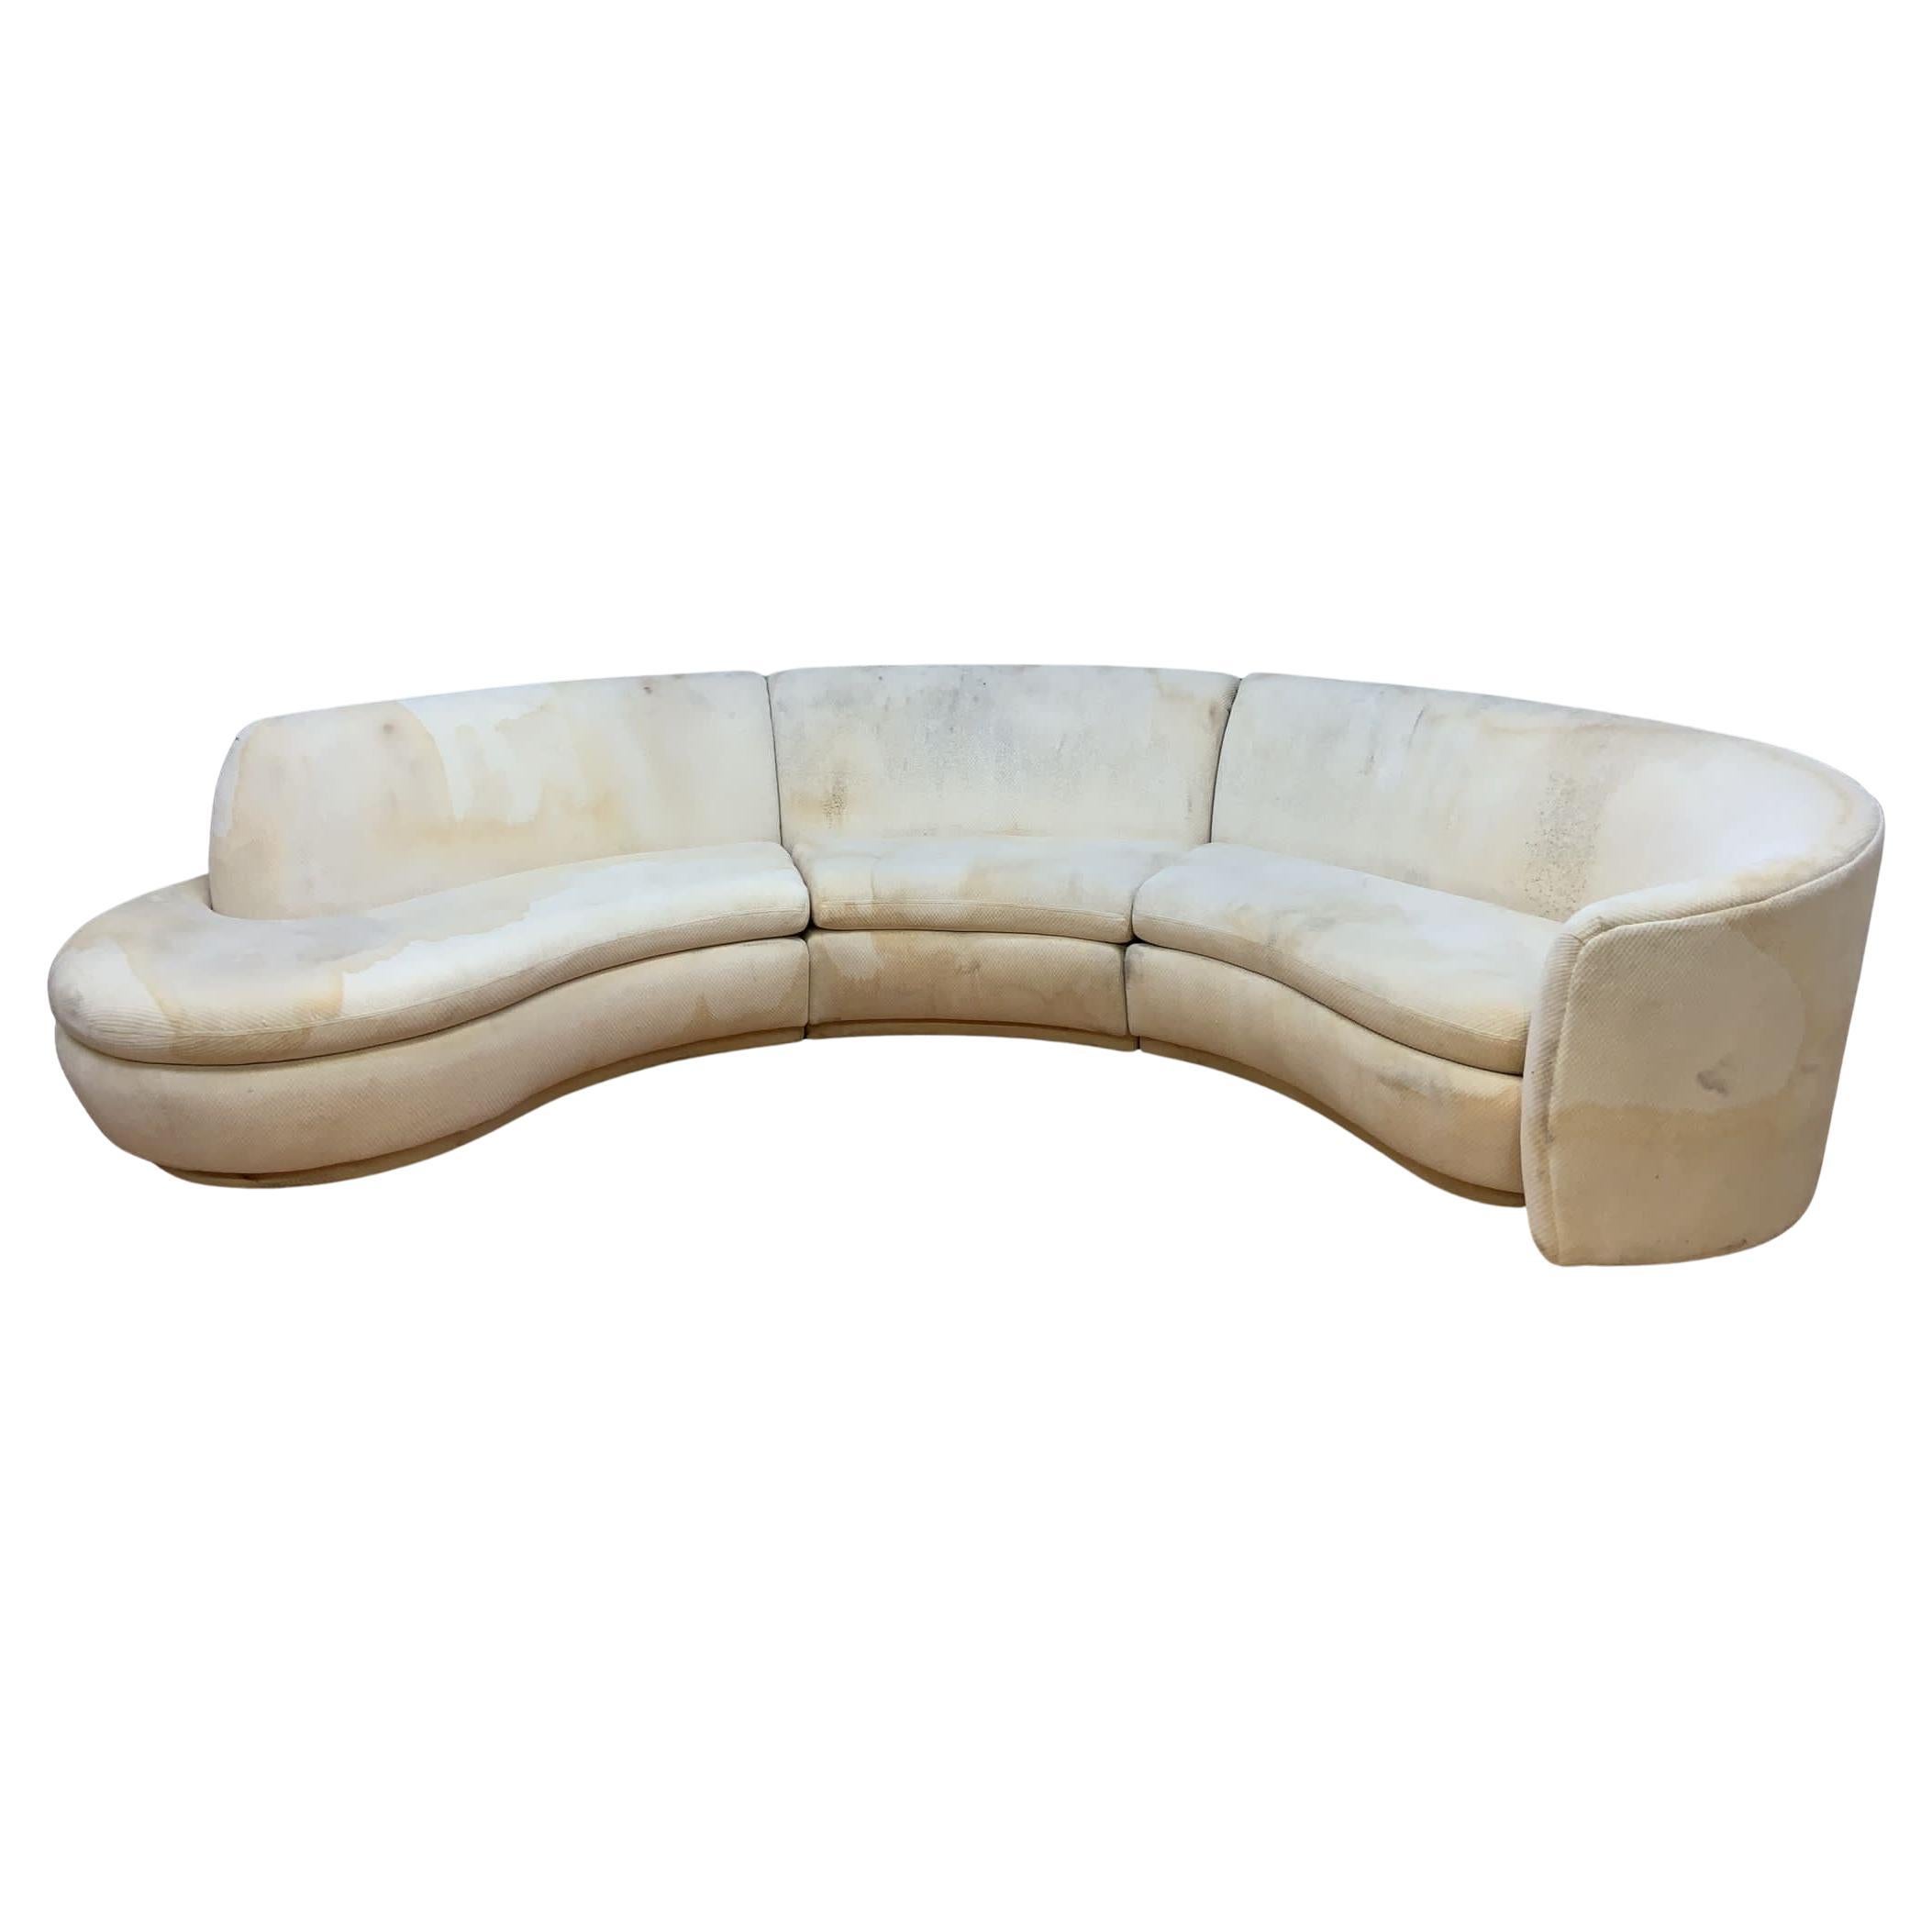 Mid Century Modern Vladimir Kagan Style 3 Piece Curved Sectional Sofa  For Sale